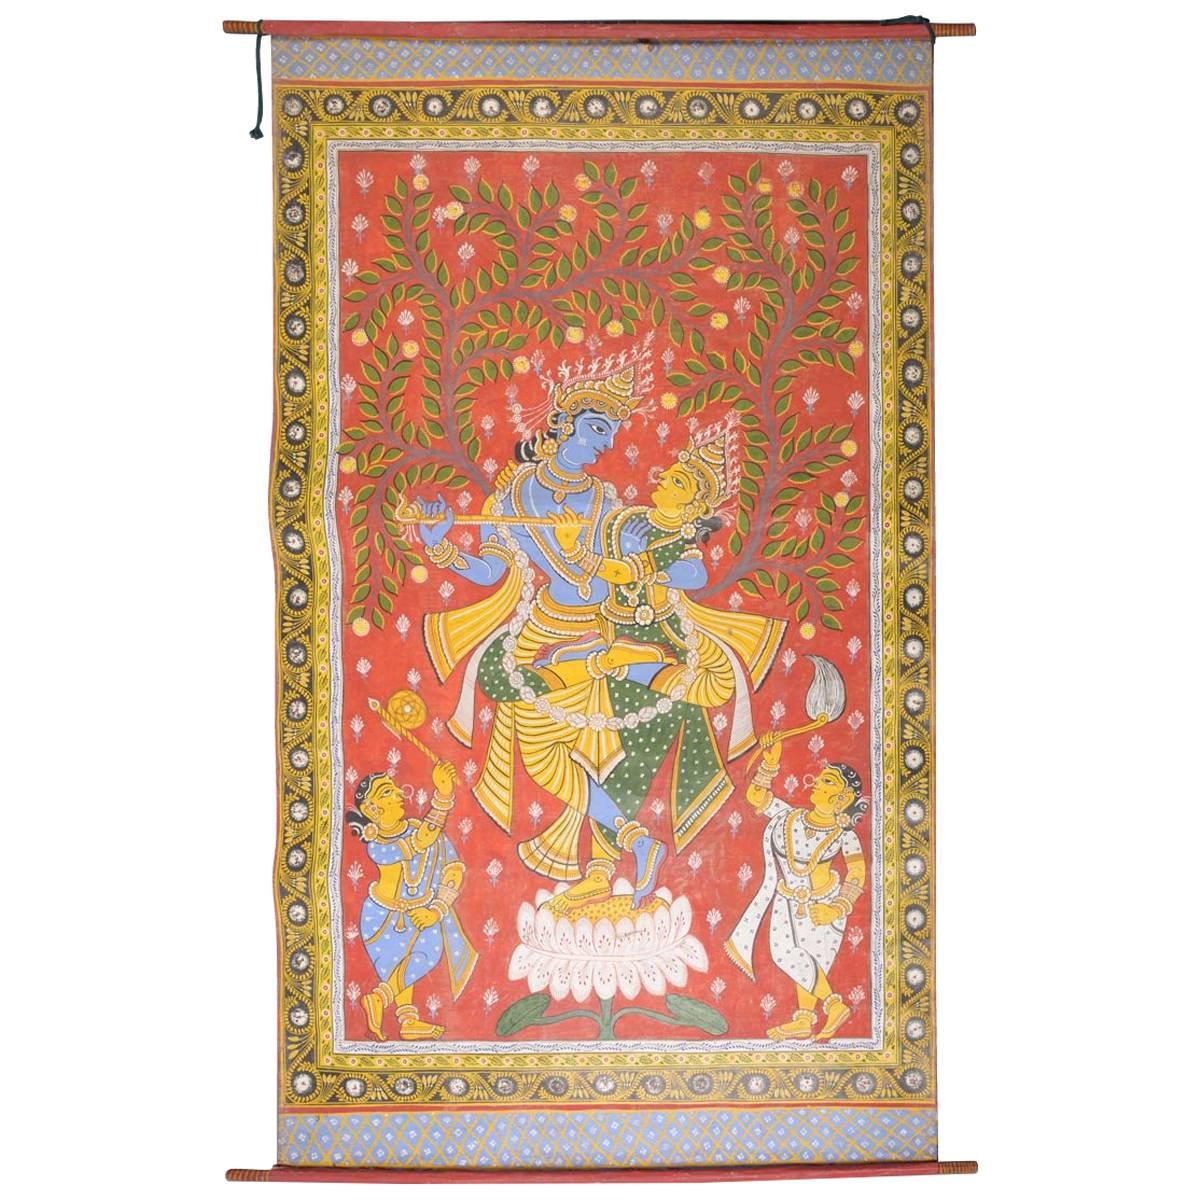 Large Hand-Painted, Rolled Painting of Radha-Krishna, the Divine Couple, India